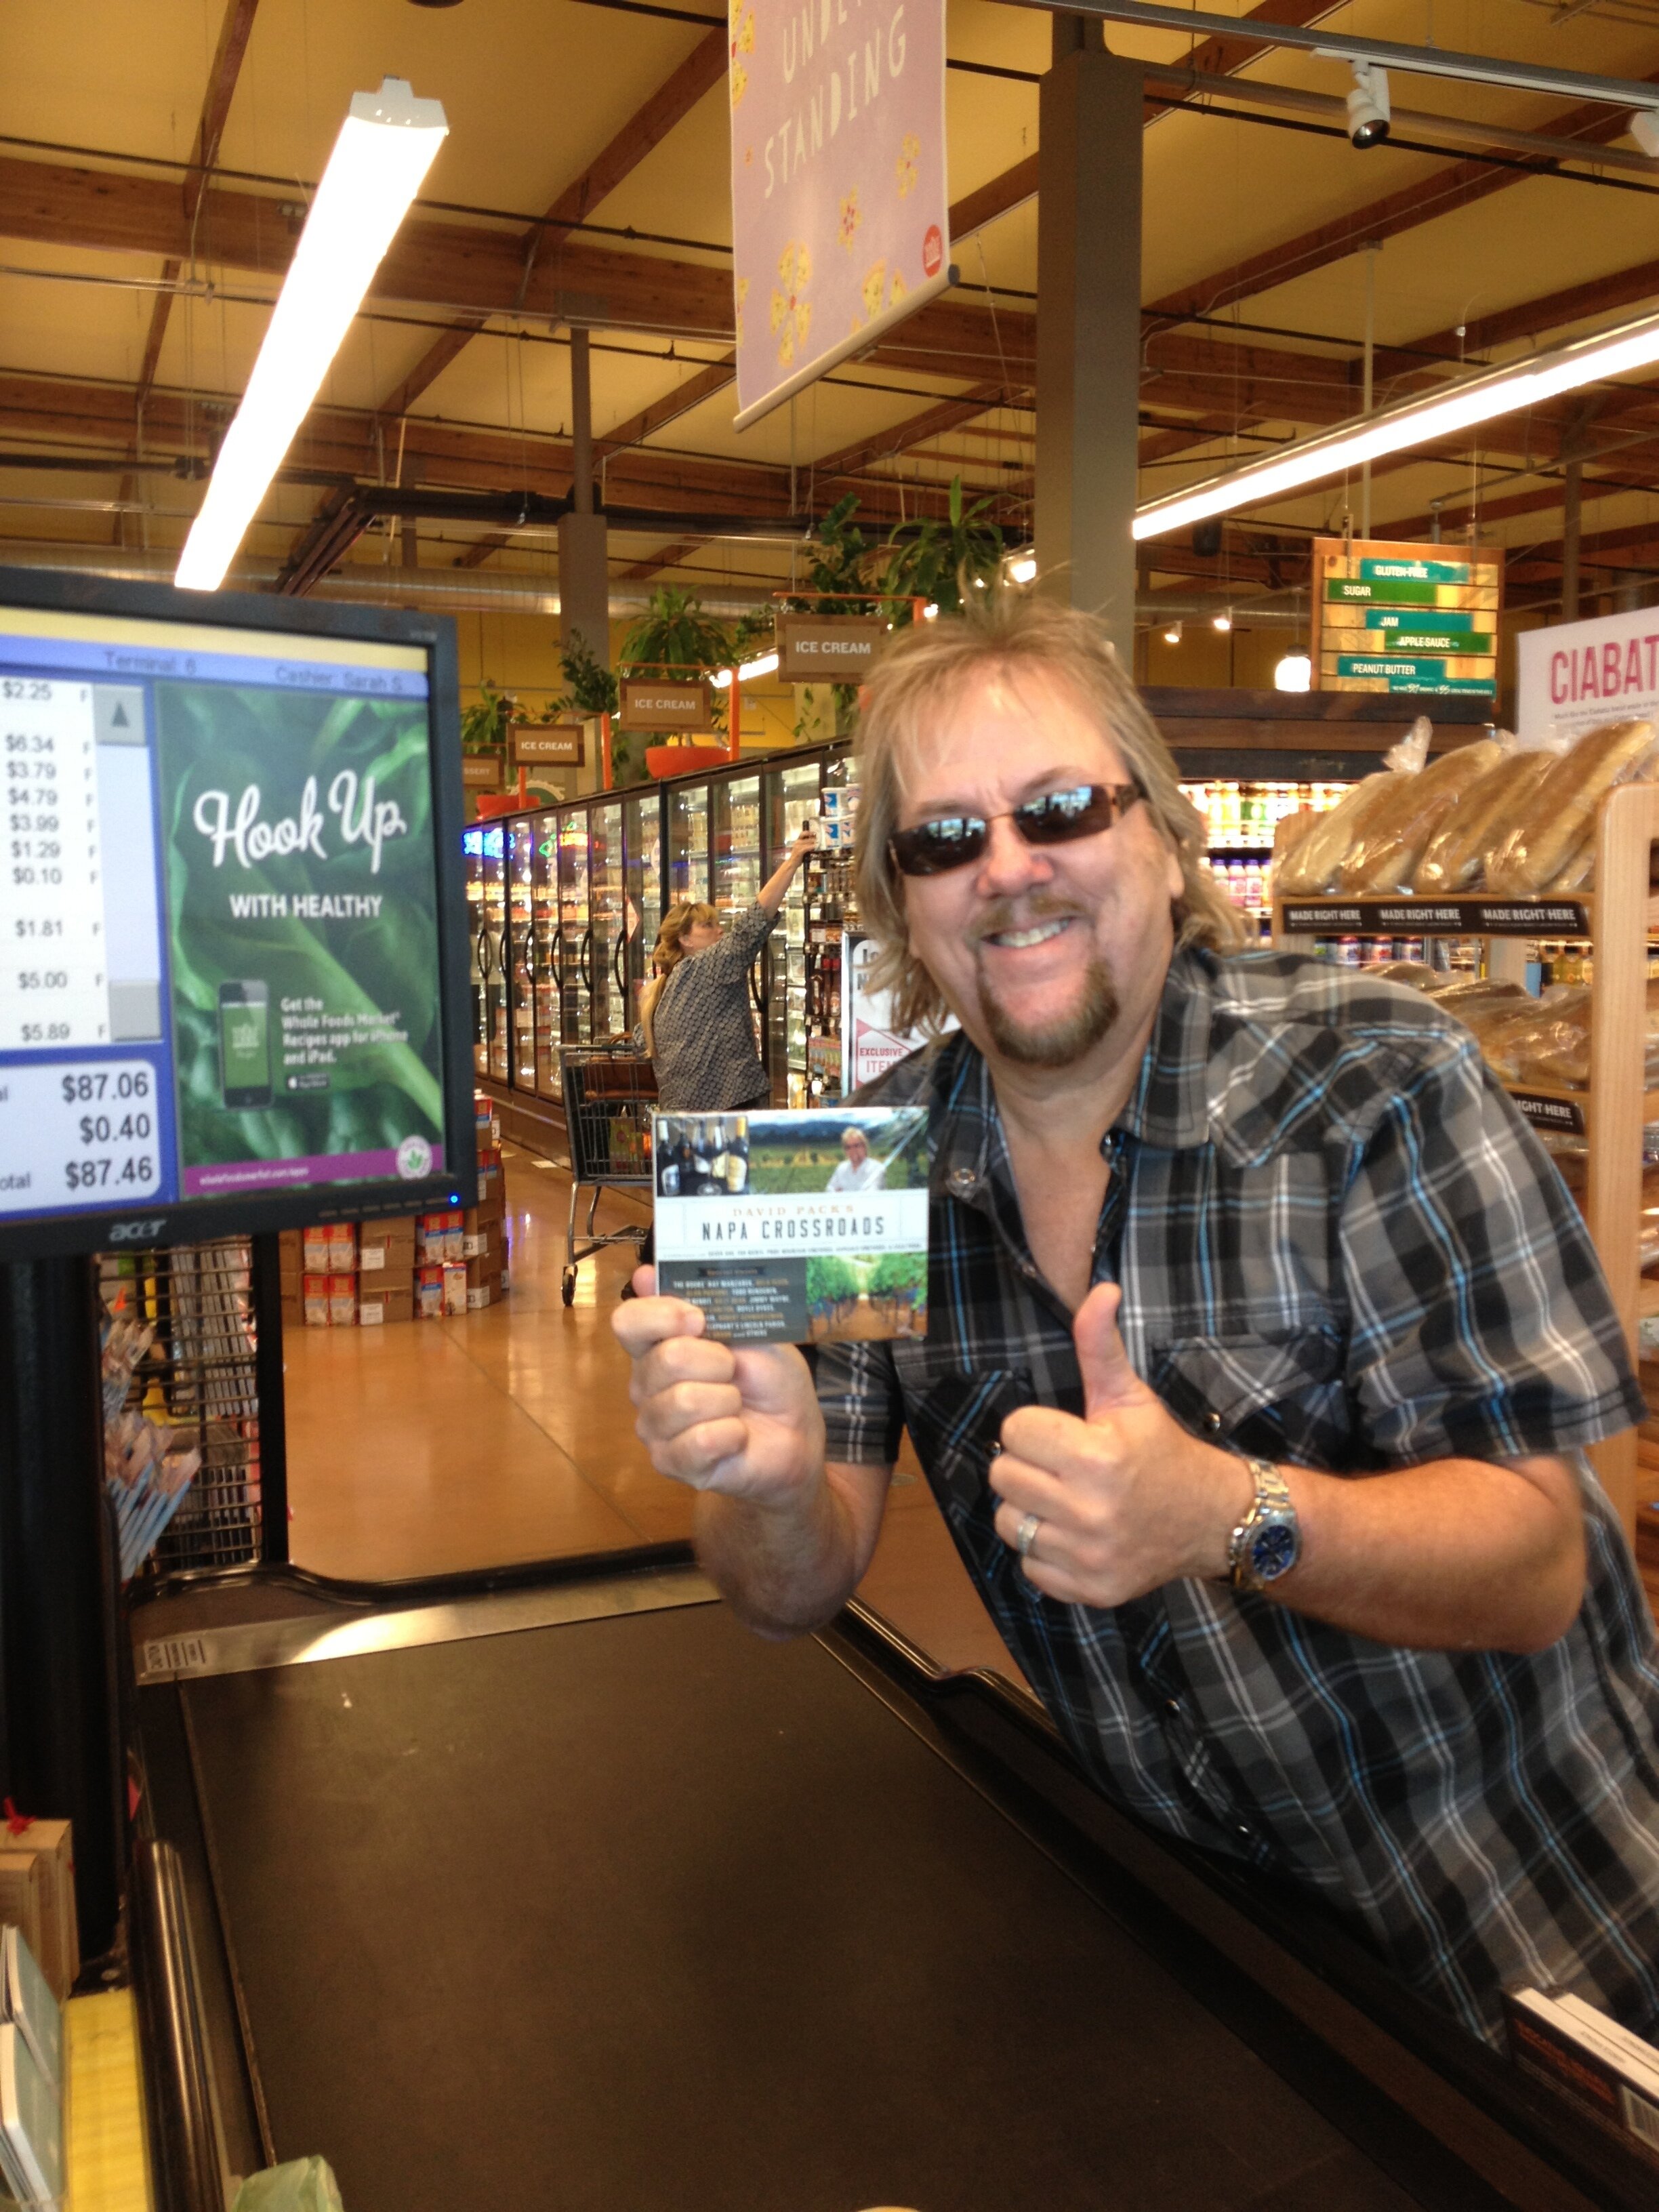 David with the Napa Crossroads CD For Sale in Whole Foods Across America